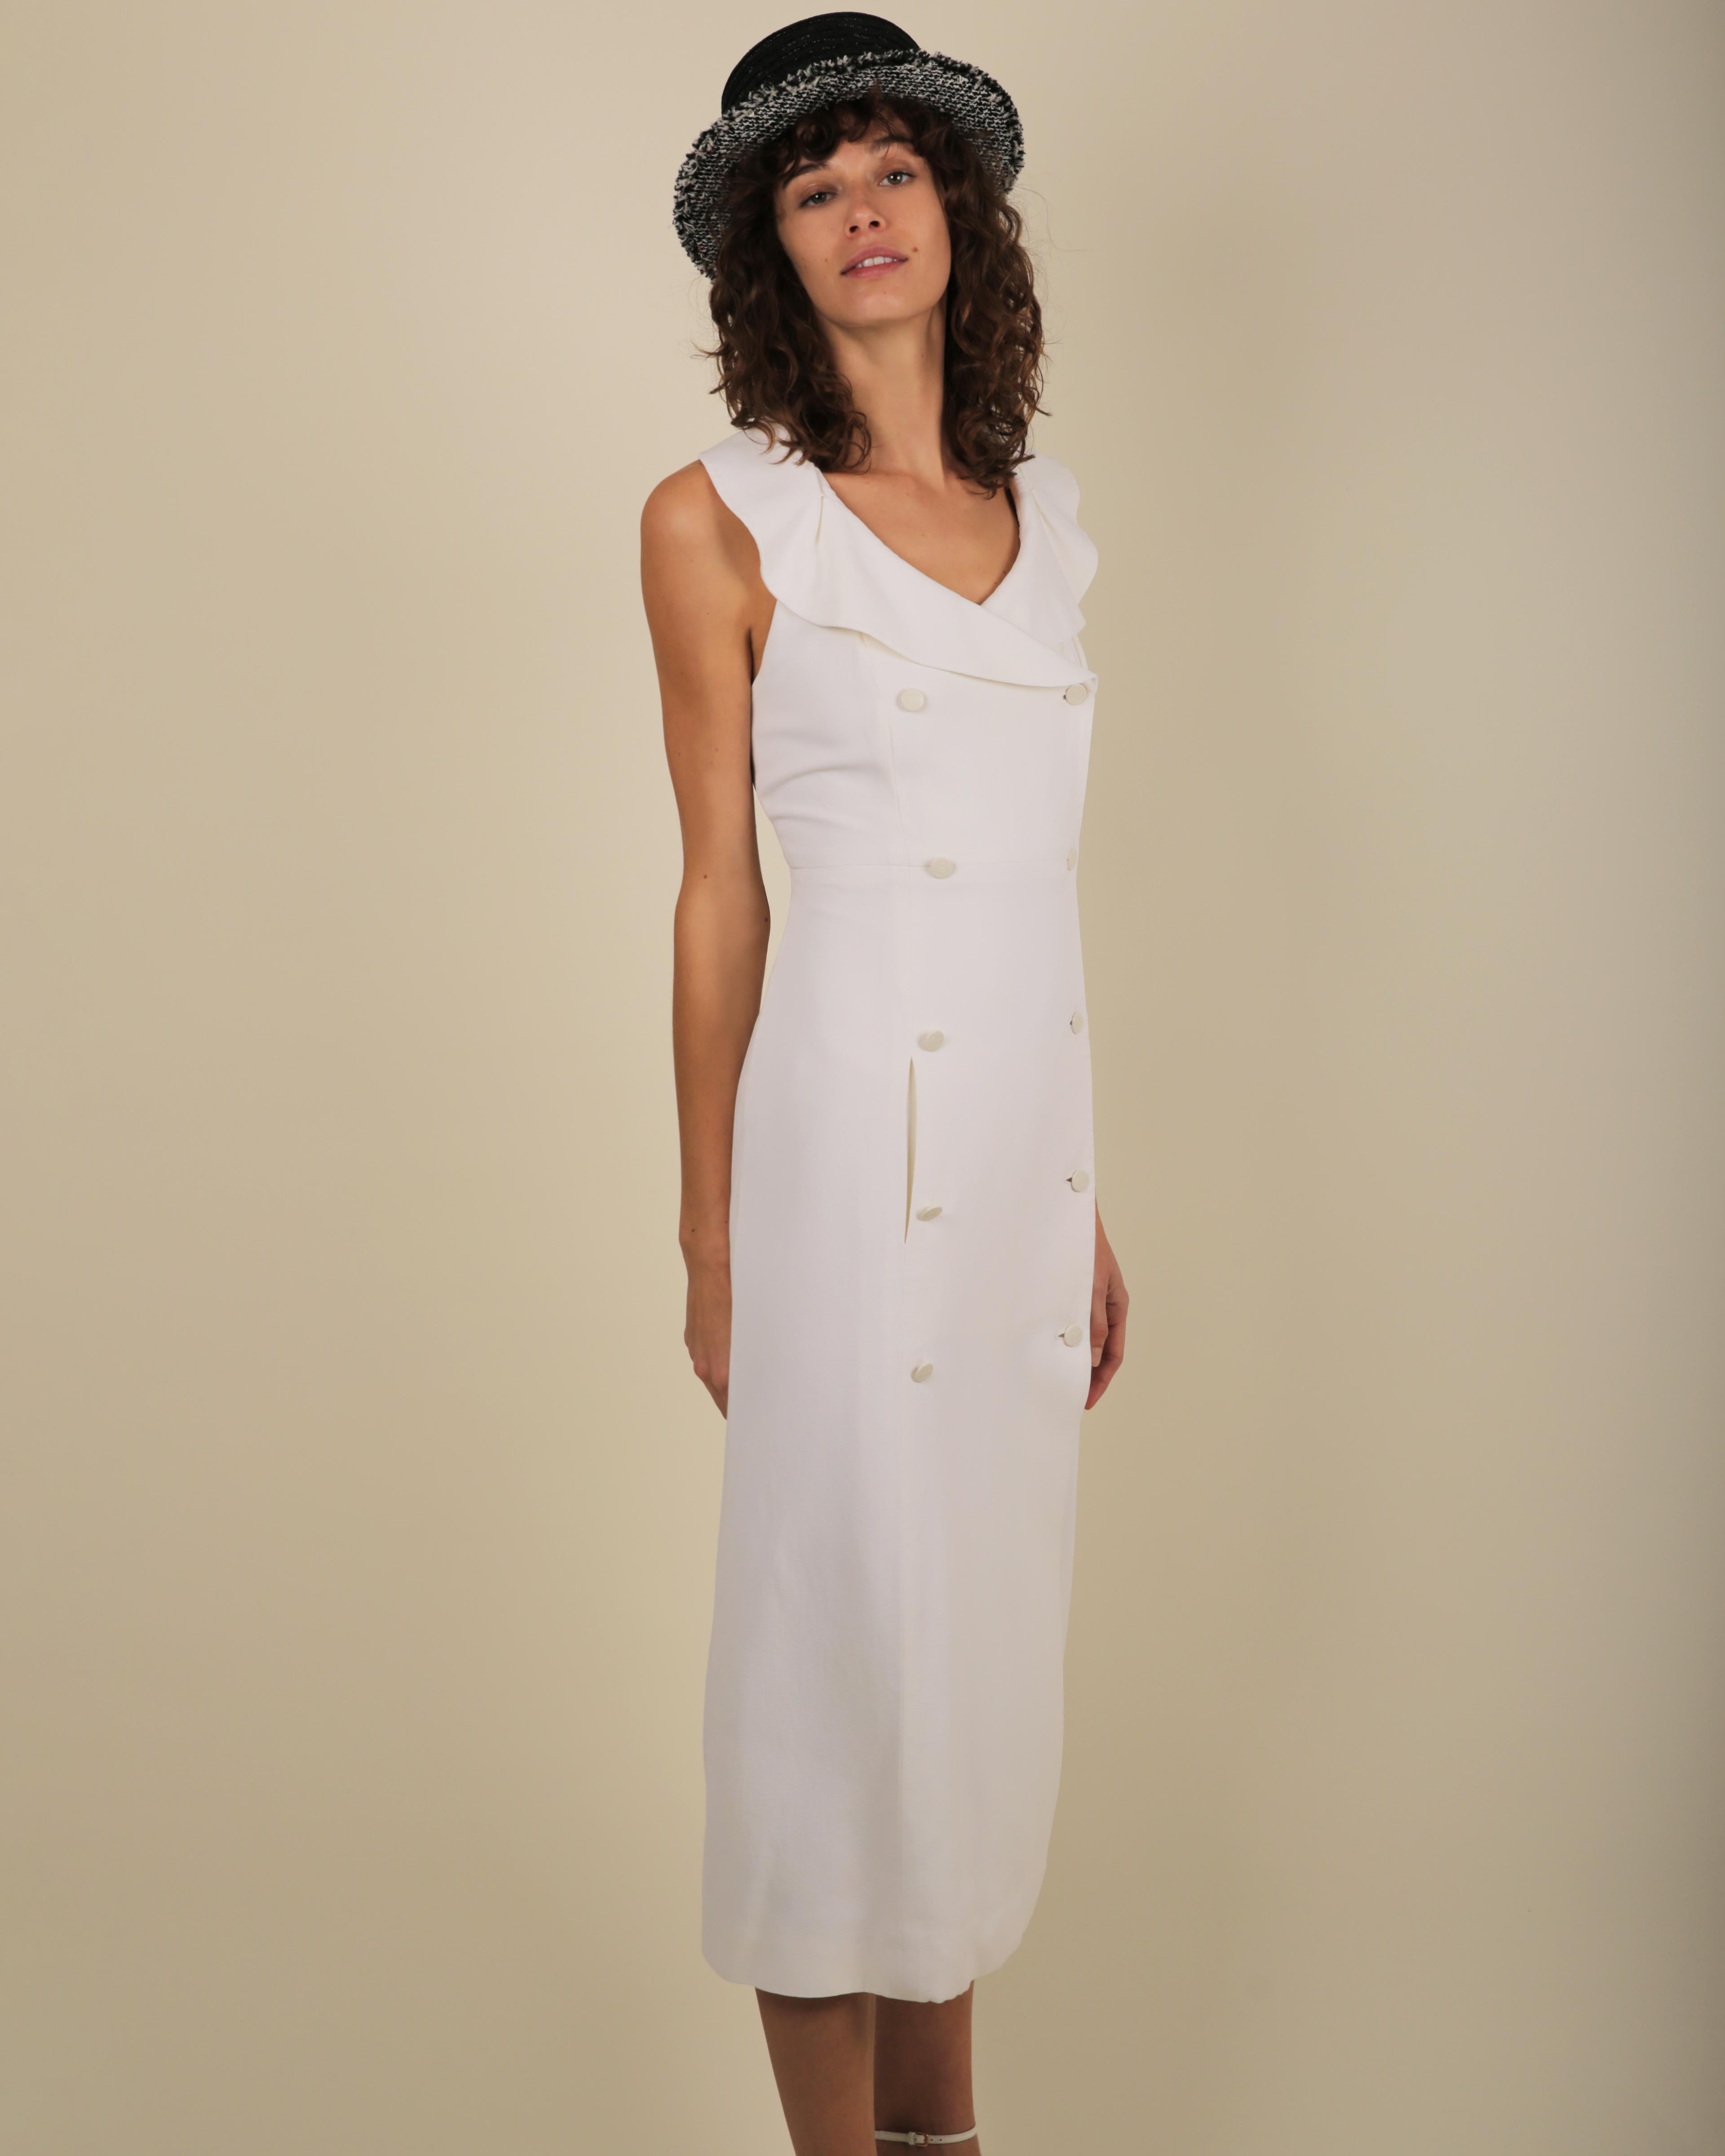 Chanel cruise 1997 vintage white wedding midi dress with logo button up front   For Sale 5